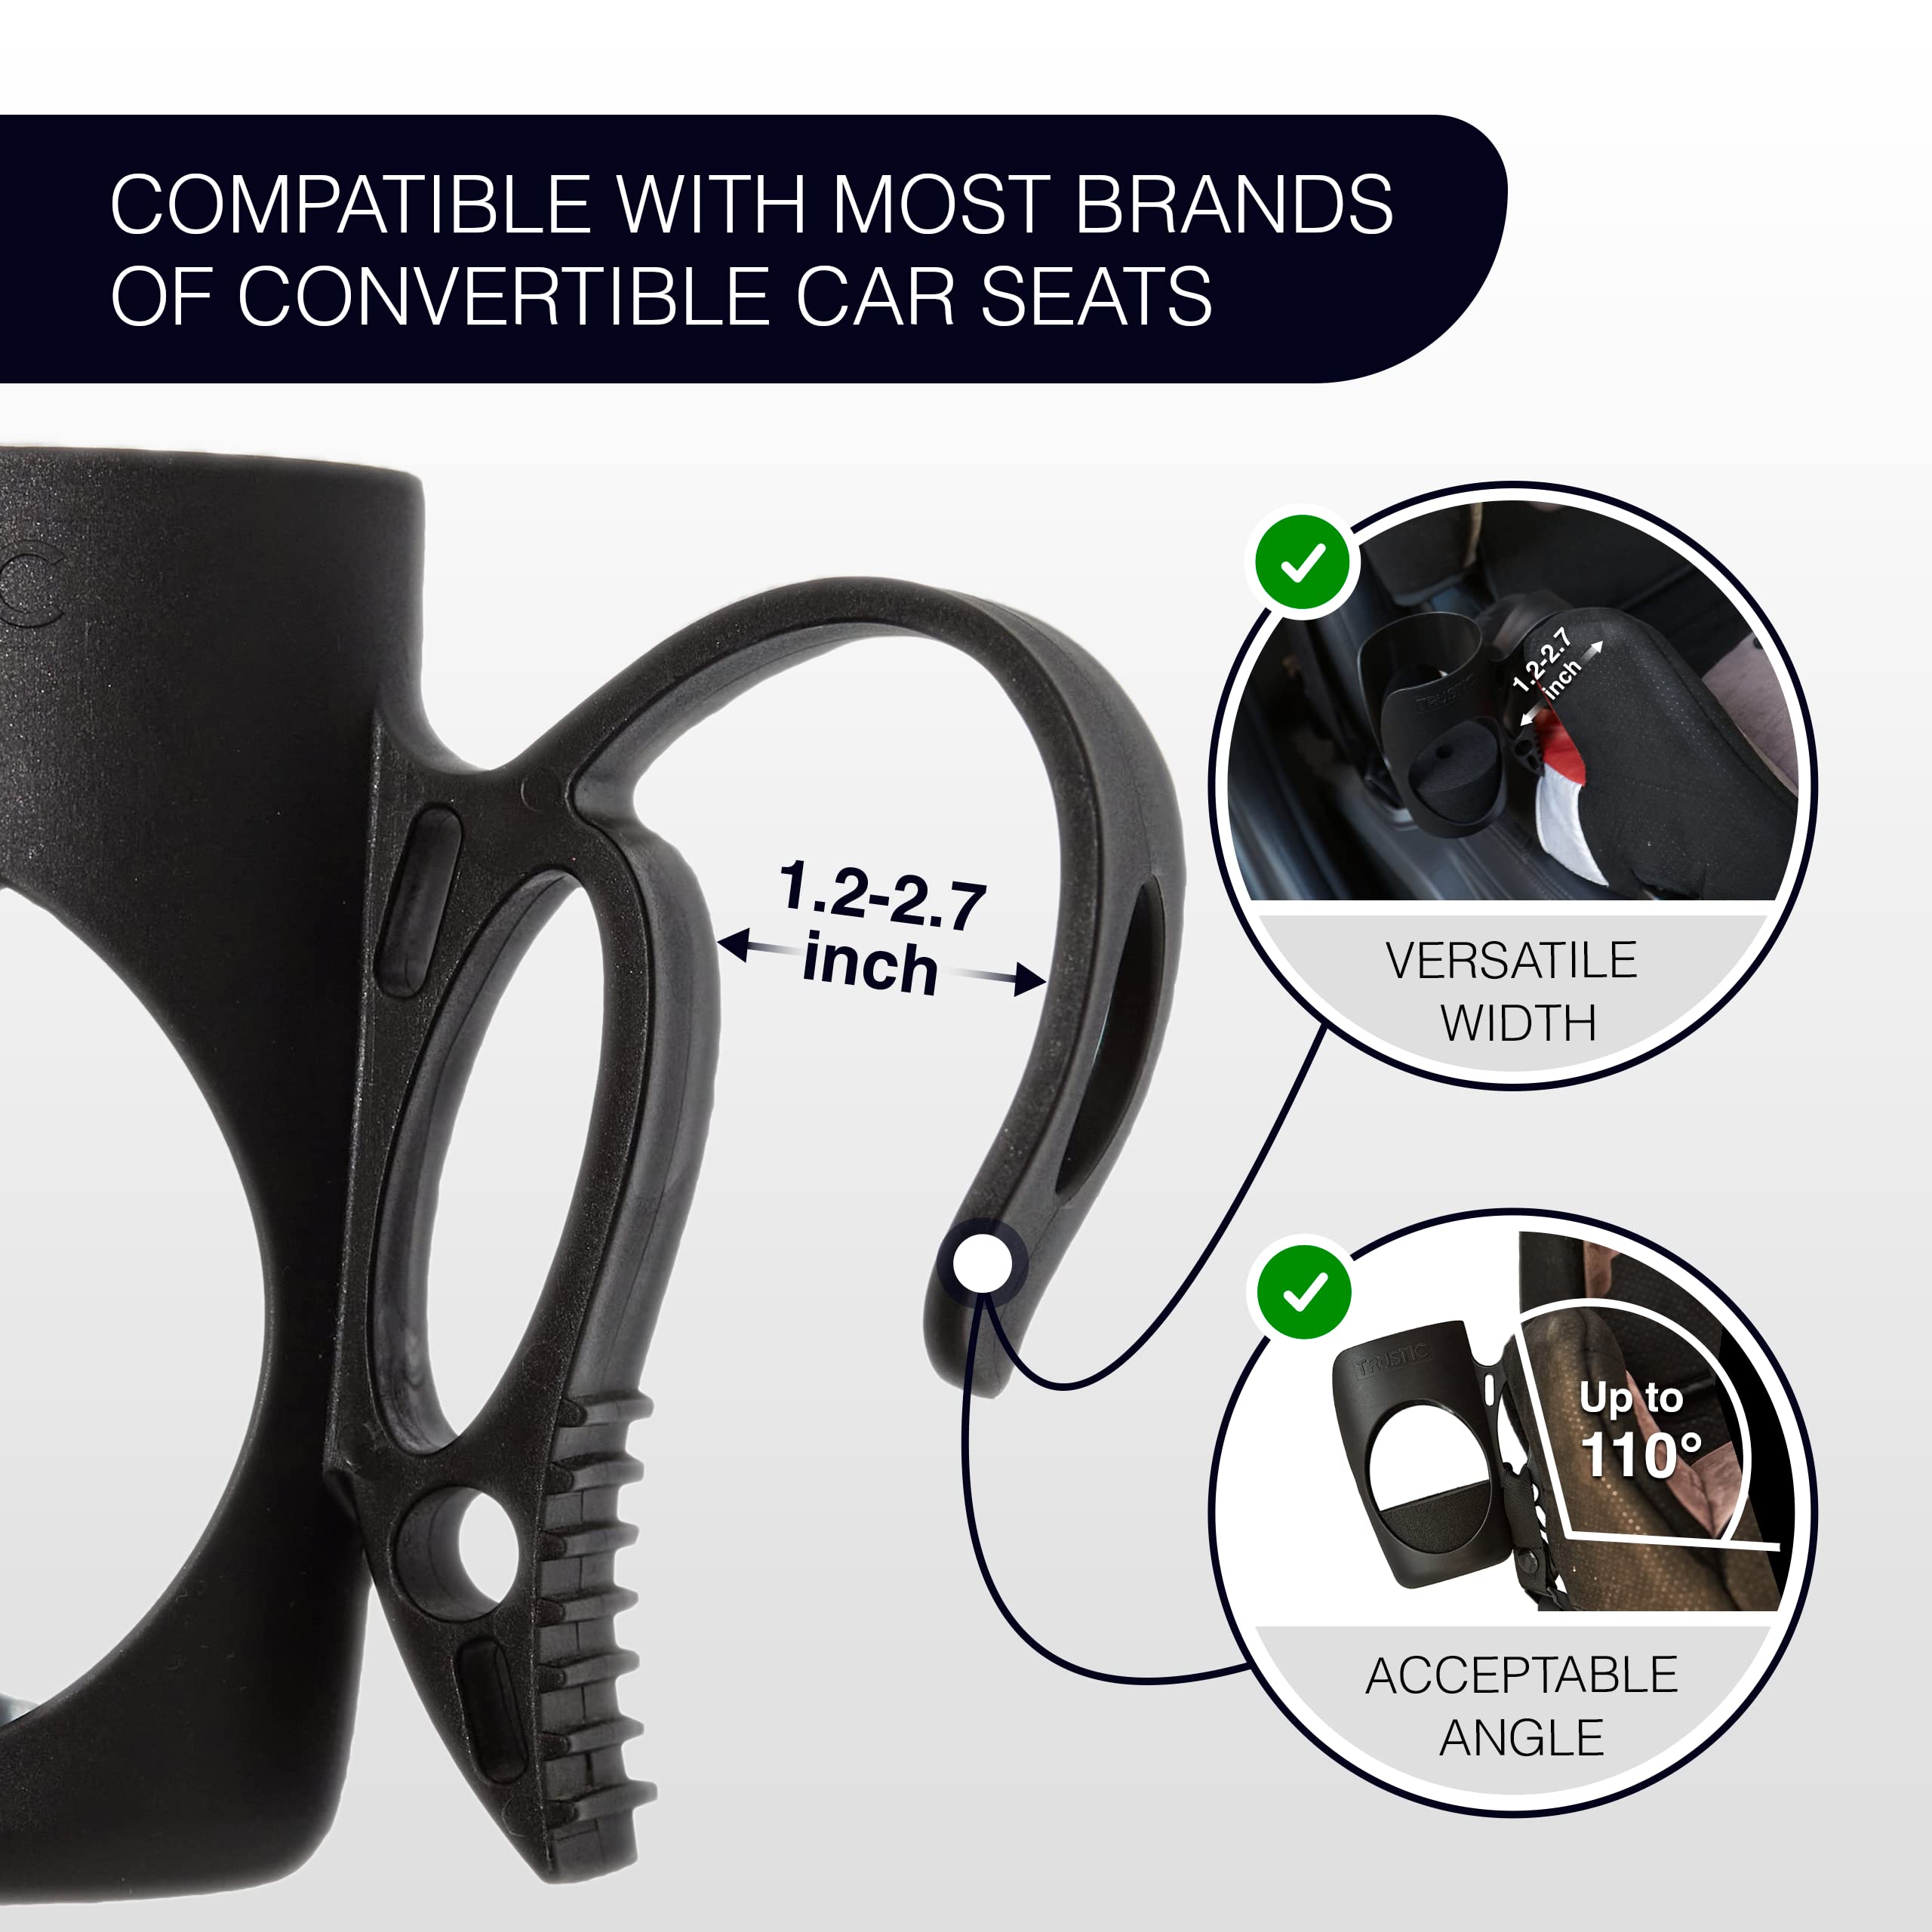 Trustic - Child Cup Holder for Convertible Car Seats - Compatible with The Majority of Car Seat Models � Black  - Like New